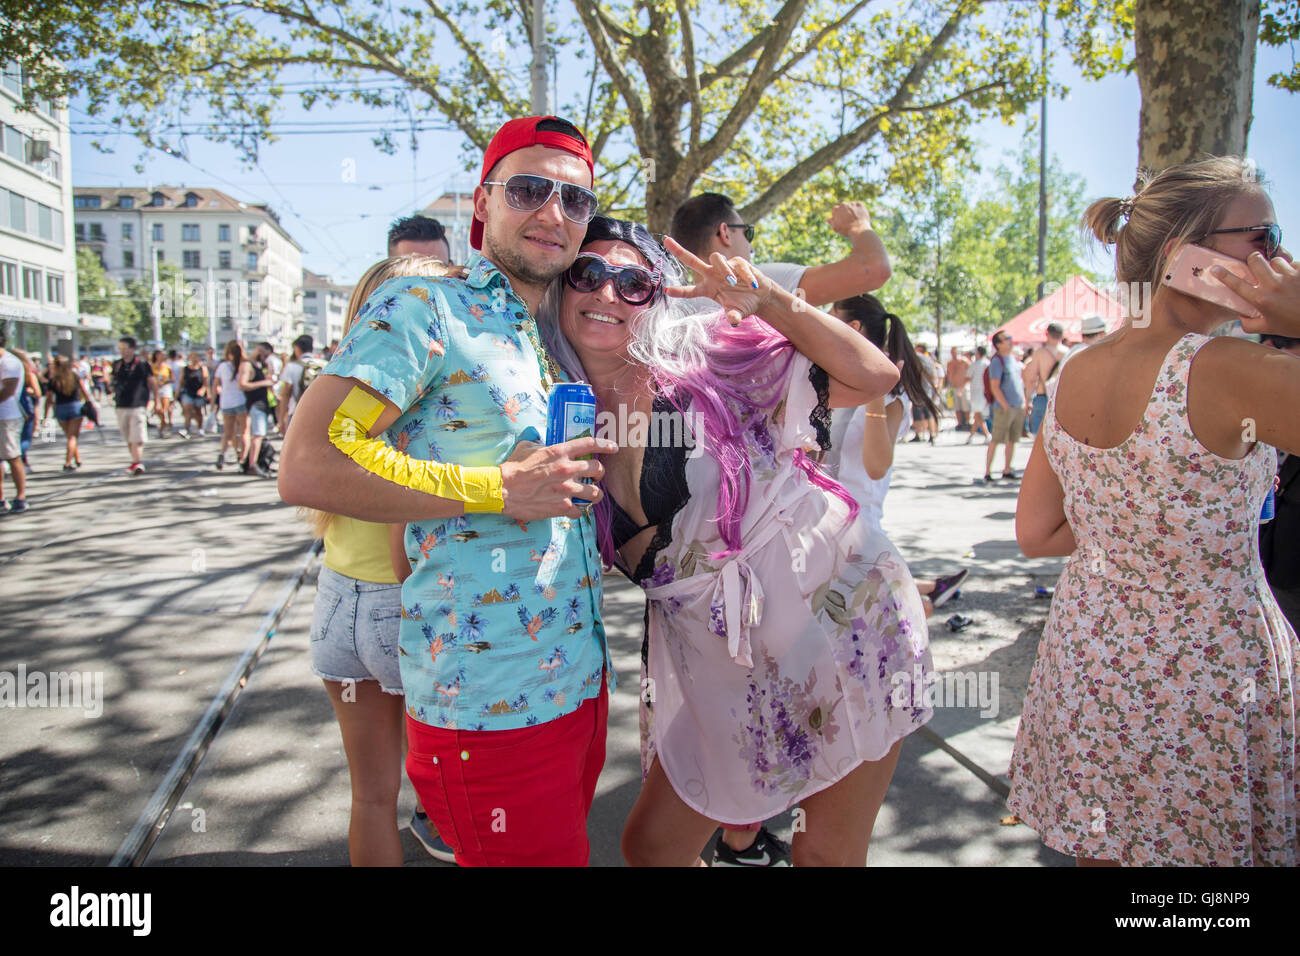 Zurich, Switzerland. 13th August 2016. Street moments and portraits of people enjoying the Street Parade Electronic Music Festival. Ludovica Bastianini / Alamy Live News Stock Photo